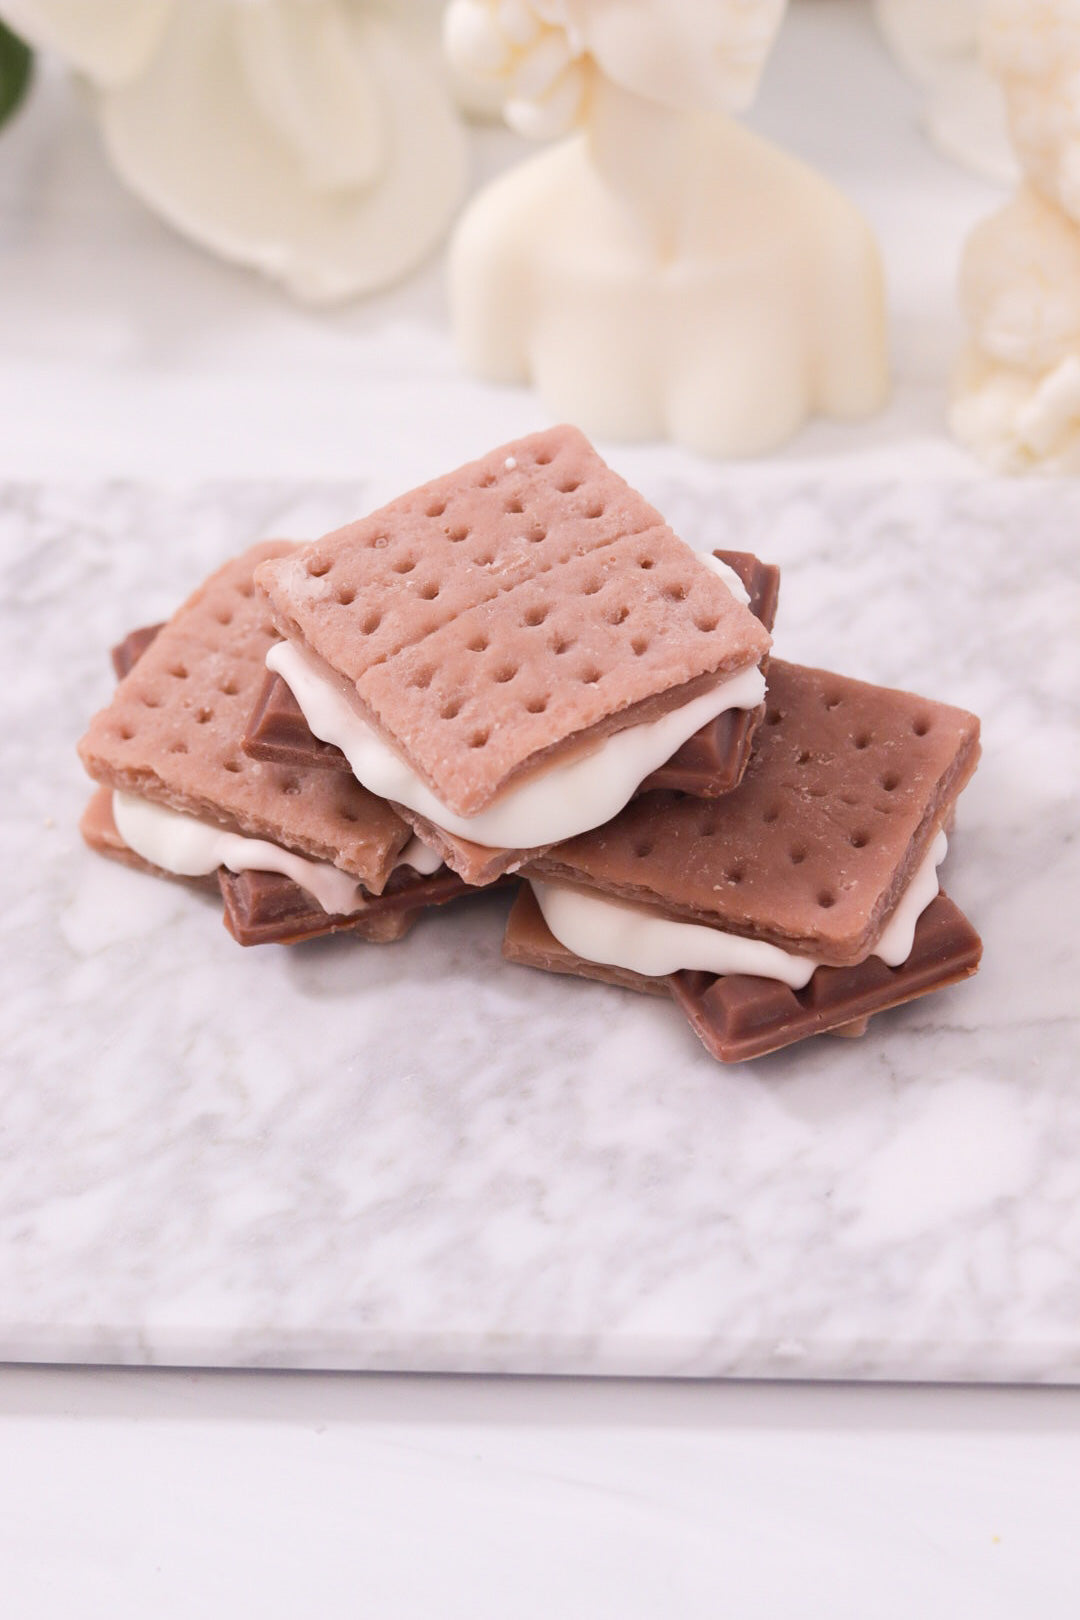 S'mores wax melts molds